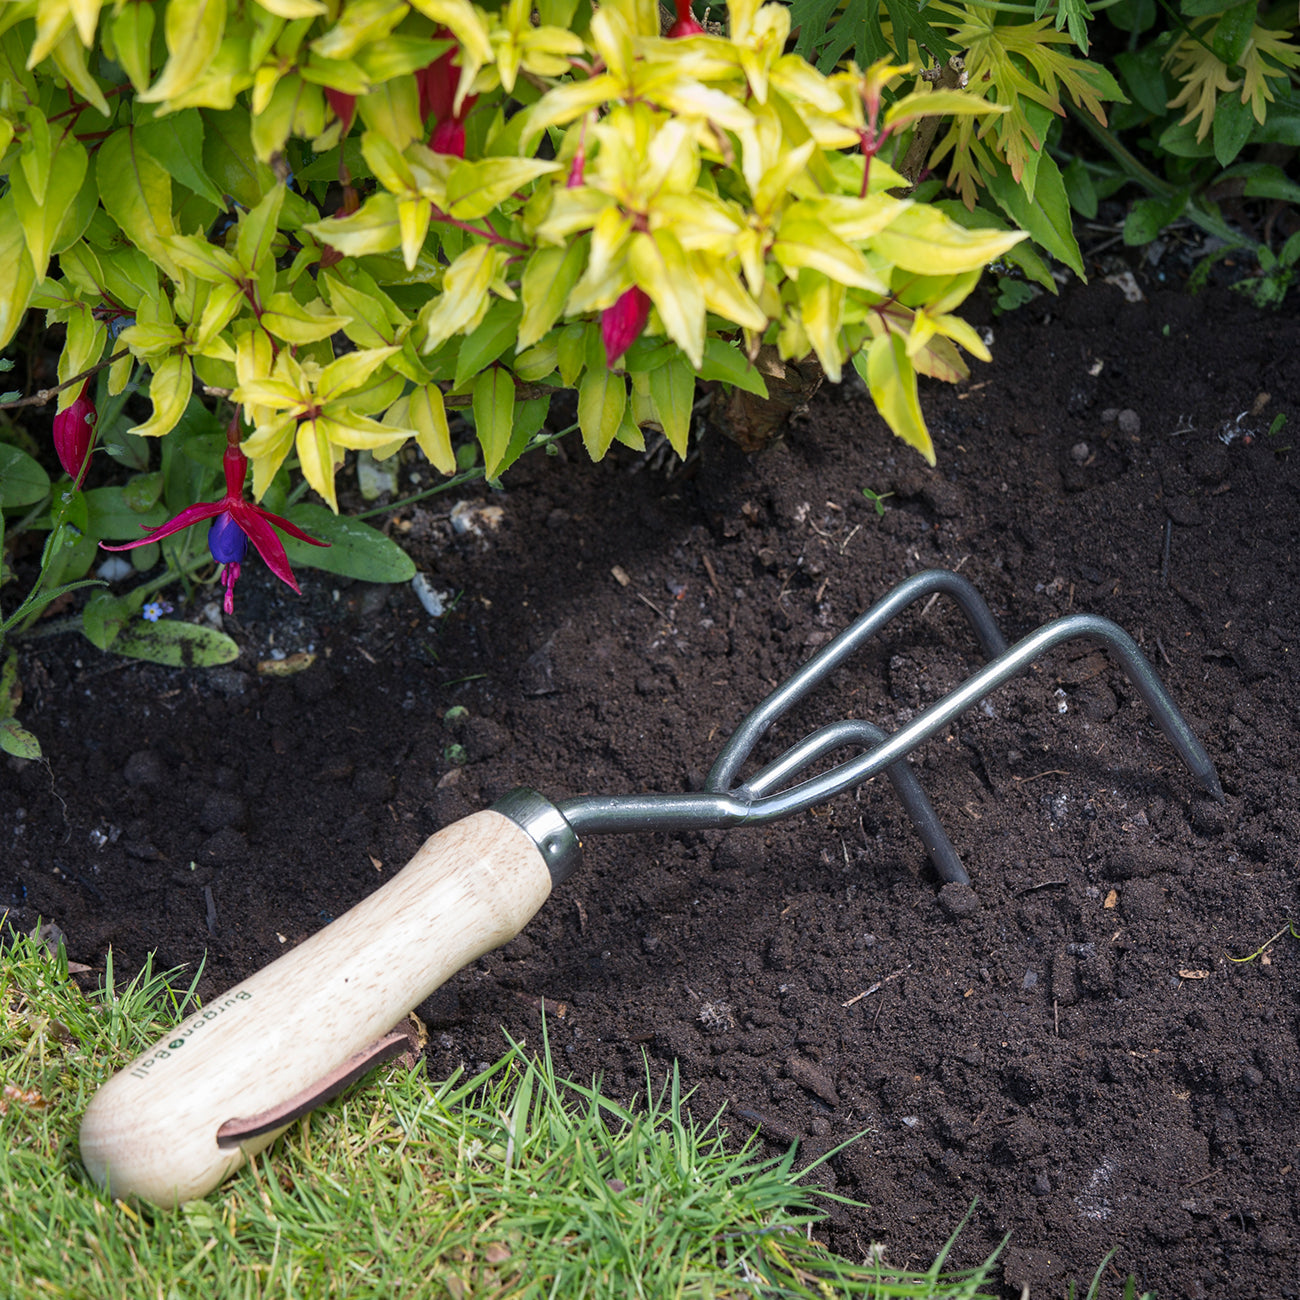 This stainless steel claw cultivator is endorsed by the Royal Horticultural Society, perhaps the ultimate gardening accolade.